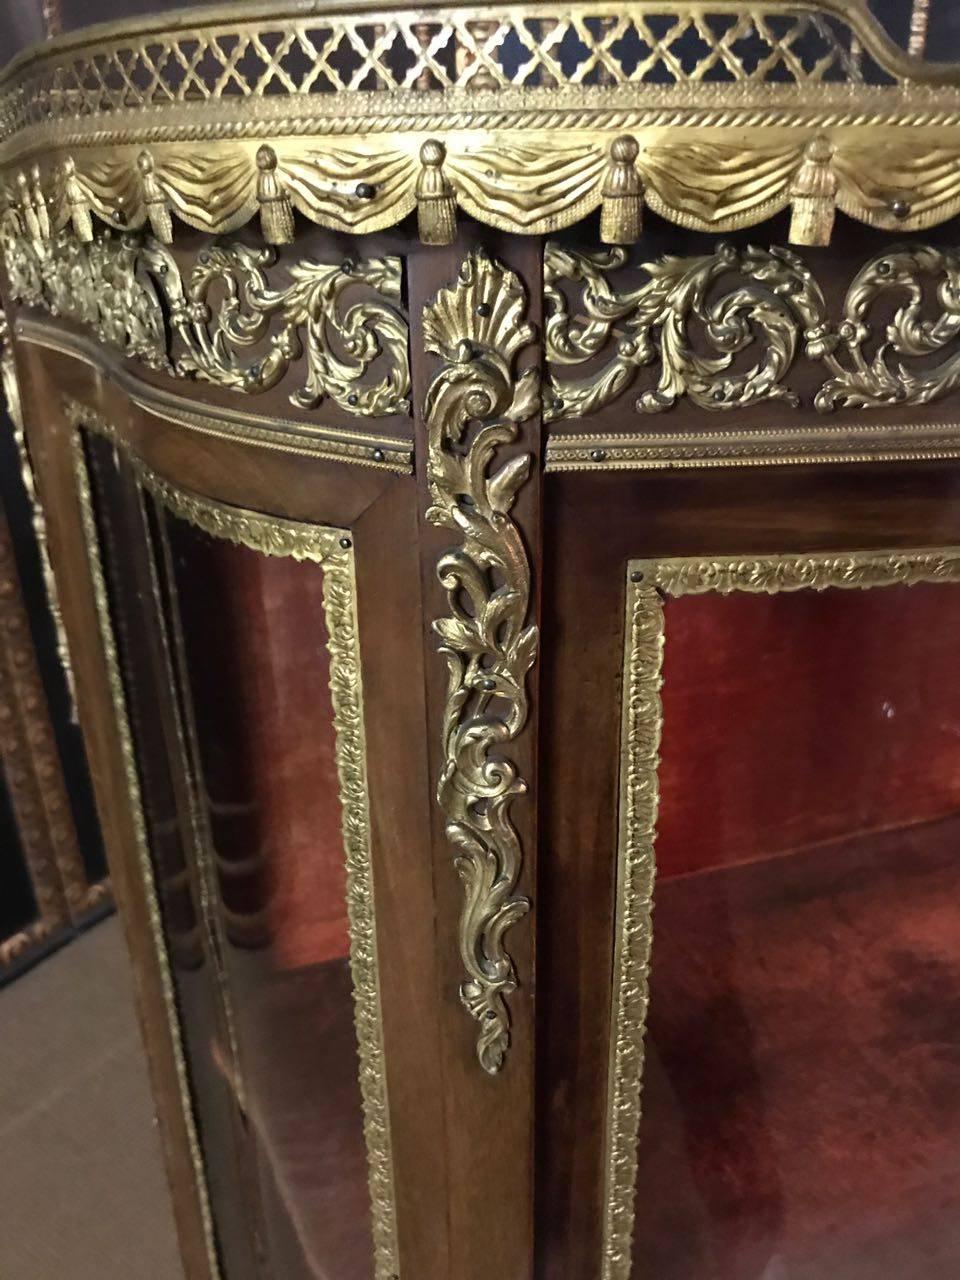 Rosewood on solid wood. High-aisle, one-door, curved and three-sided glazed body. On its curled feet, a draped frame.
Three-sided glazed display case. Slightly protruding top plate with brass gallery. Rich bronze fittings. Backboard covered with